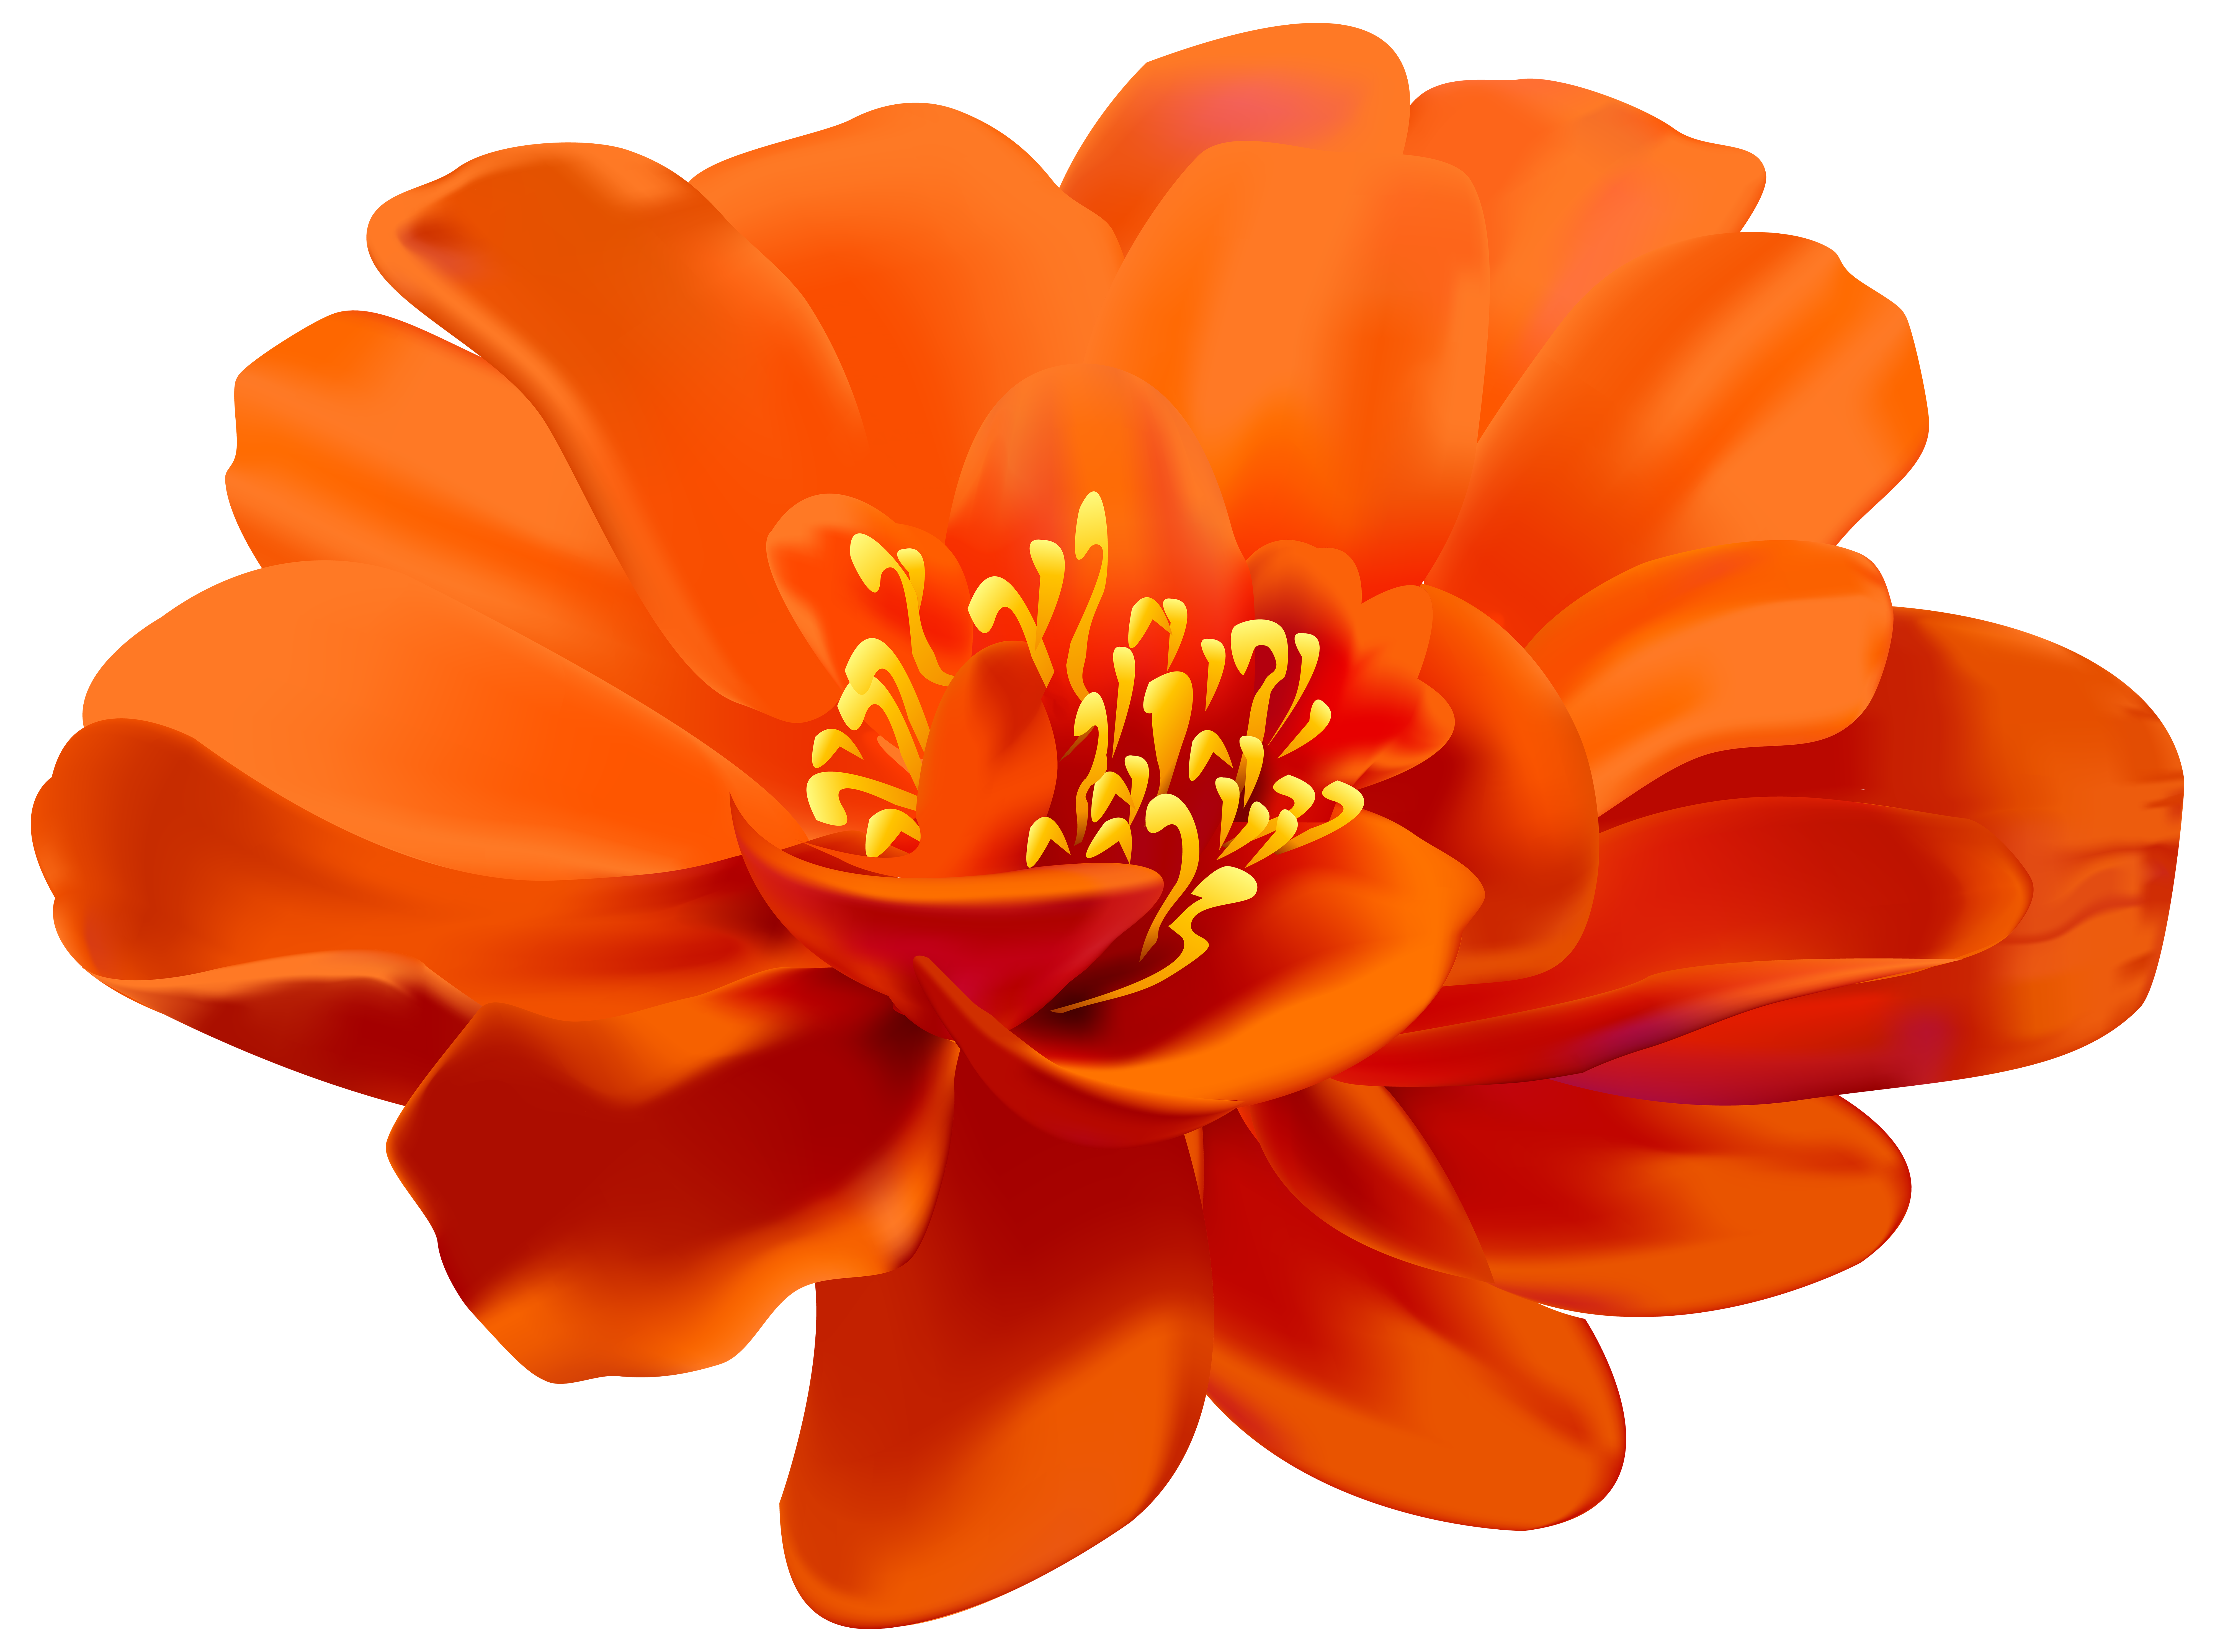 Flower Orange Transparent Png Clip Art Image Gallery Yopriceville High Quality Images And Transparent Png Free Clipart,Bombay Gin And Tonic Recipe